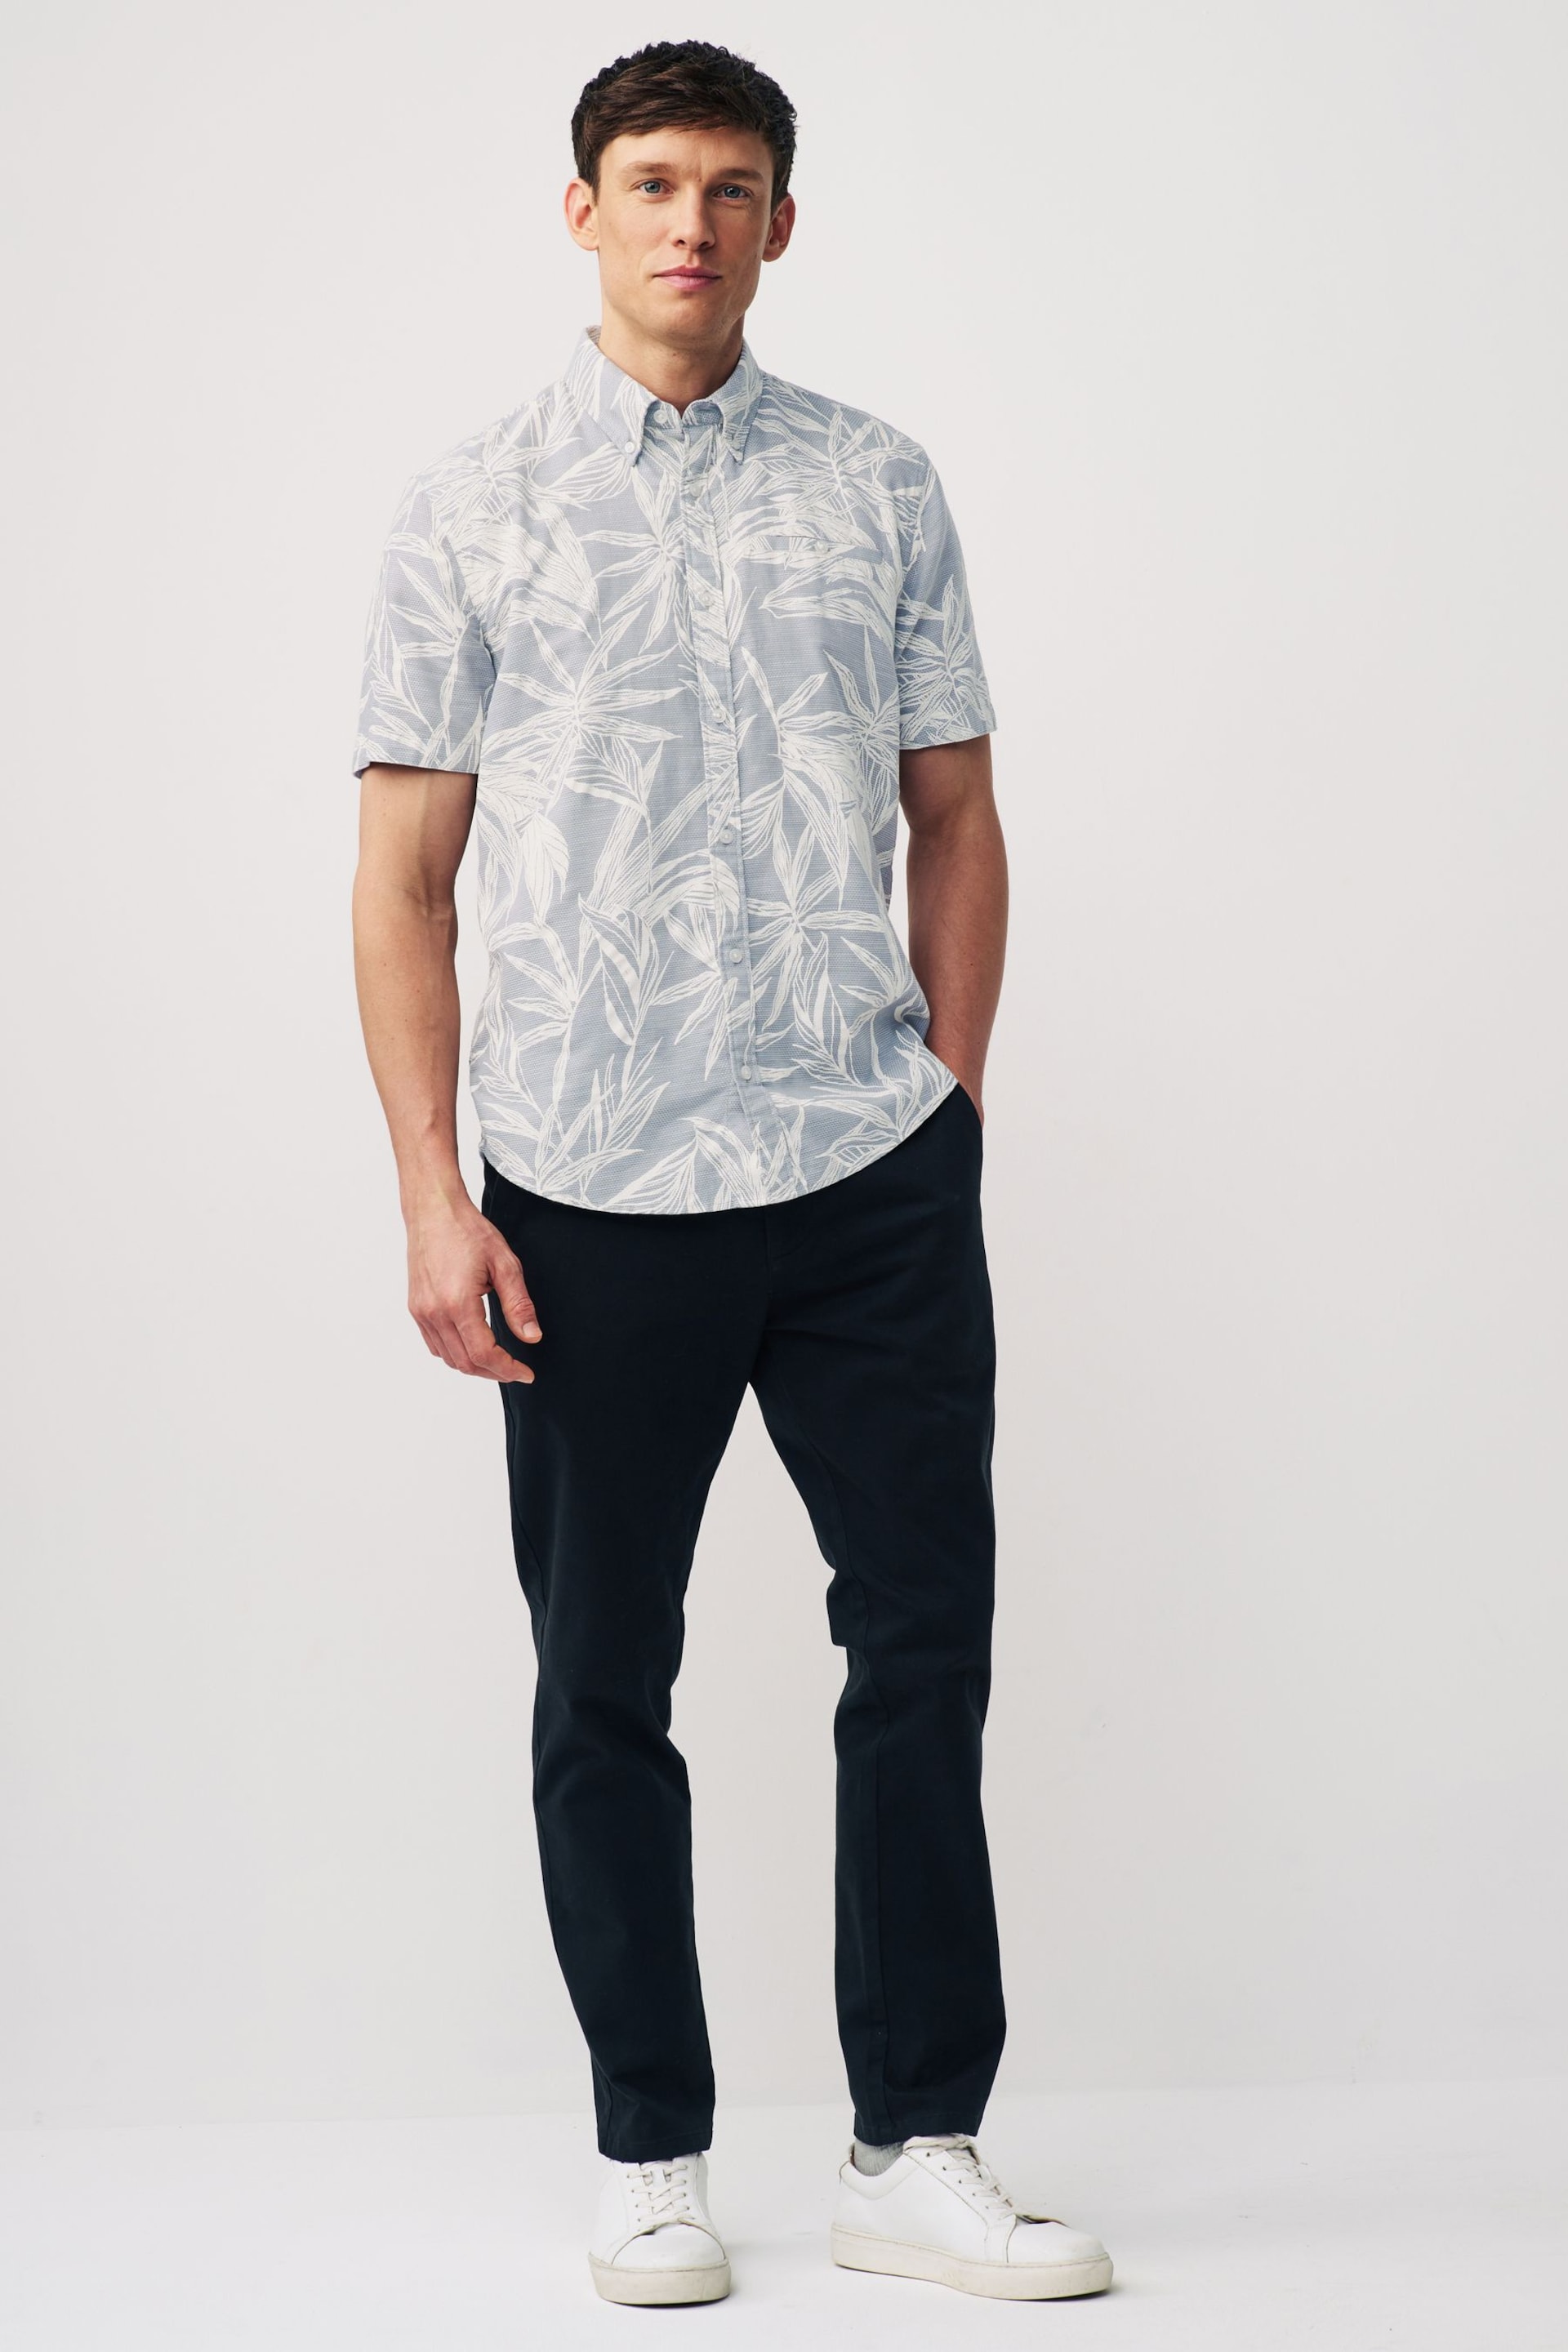 Grey Textured Floral Short Sleeve Shirt - Image 2 of 7